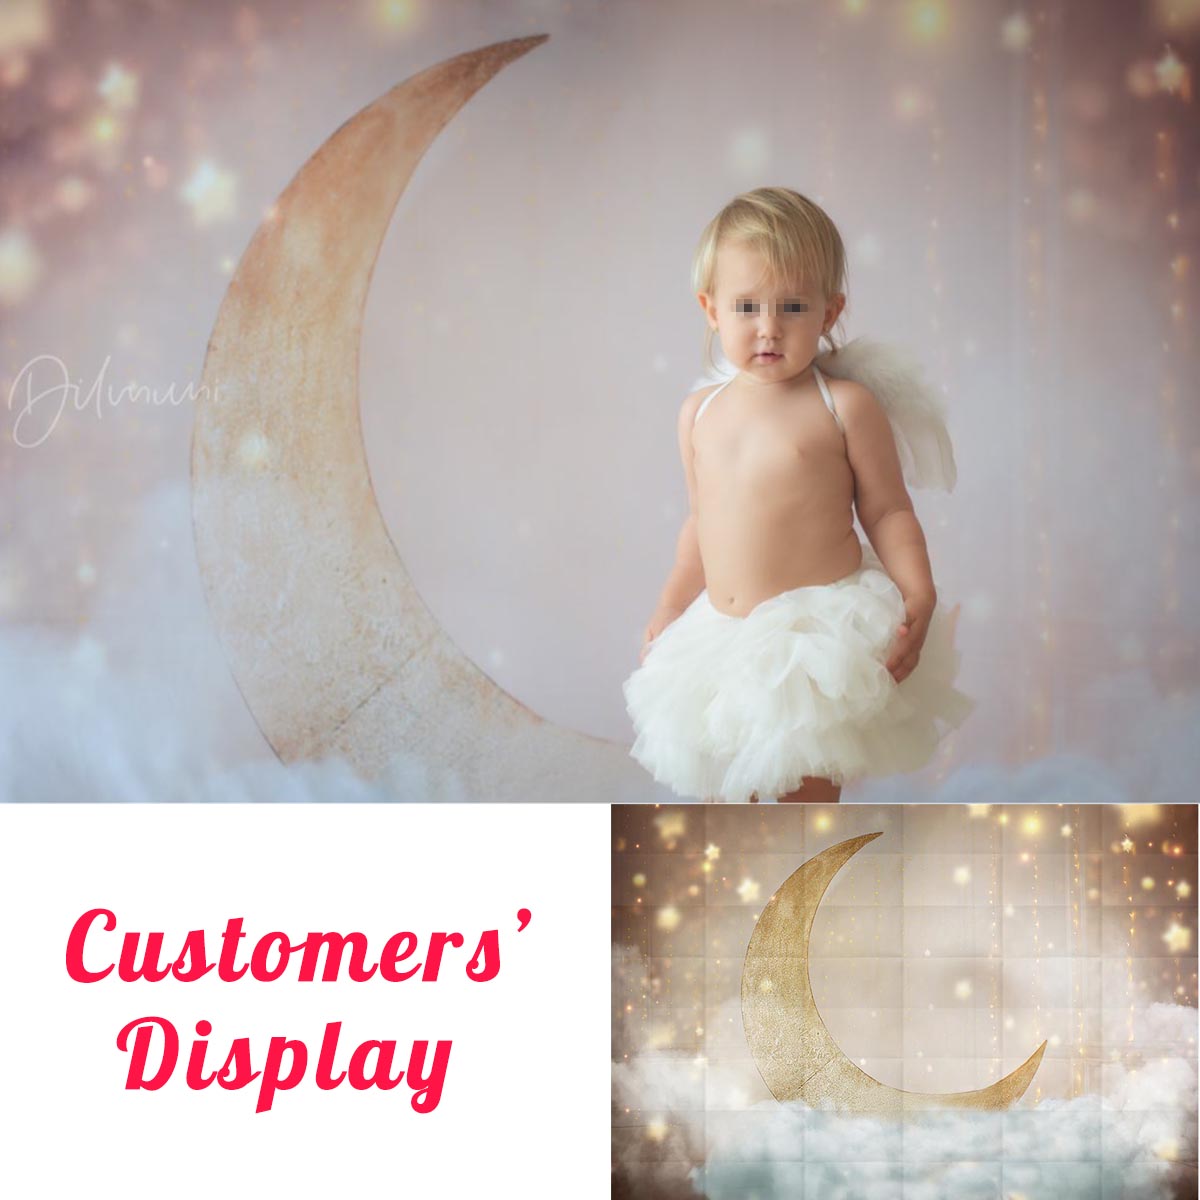 Moon-Star-Photography-Background-Children-Baby-Birthday-Theme-Backdrops-Bedroom-Decor-Tapestry-150x9-1717709